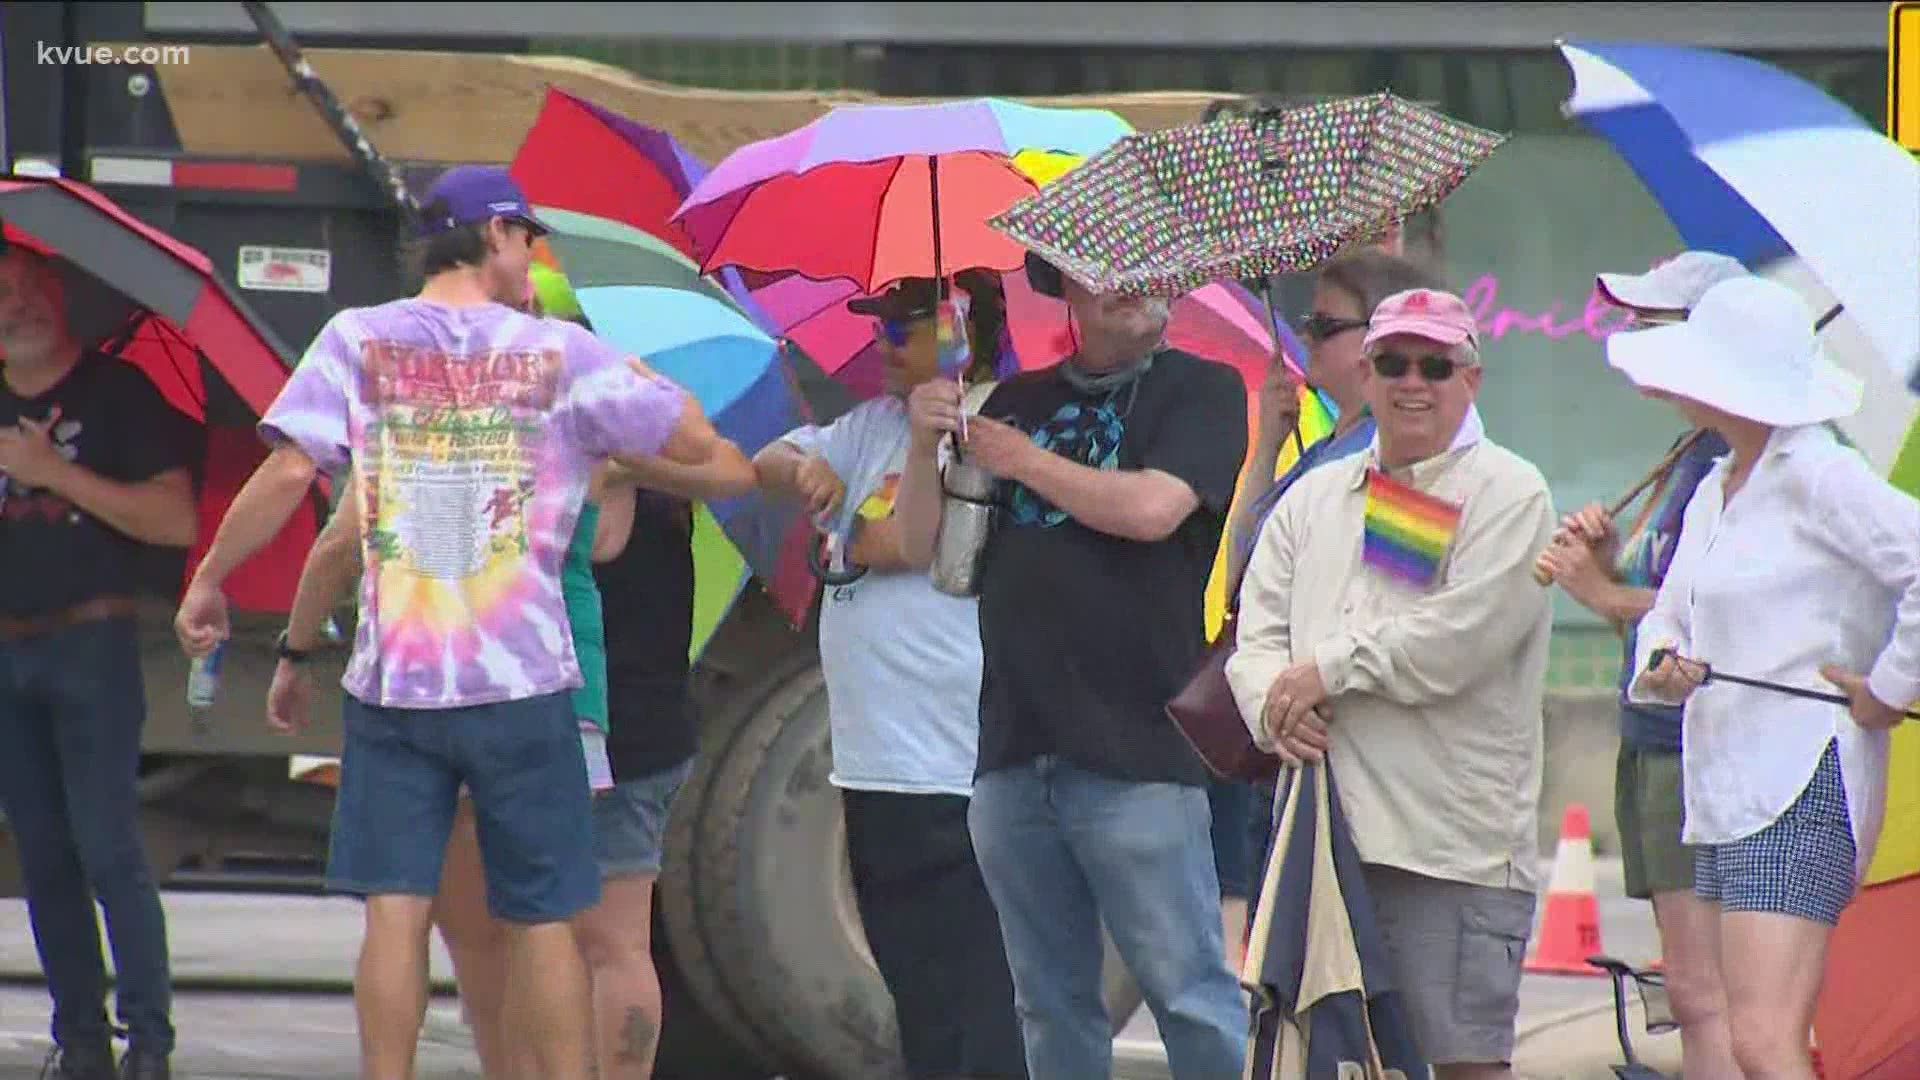 The city of Taylor host its first-ever Pride celebration on Saturday afternoon, featuring live music speeches and dances downtown.